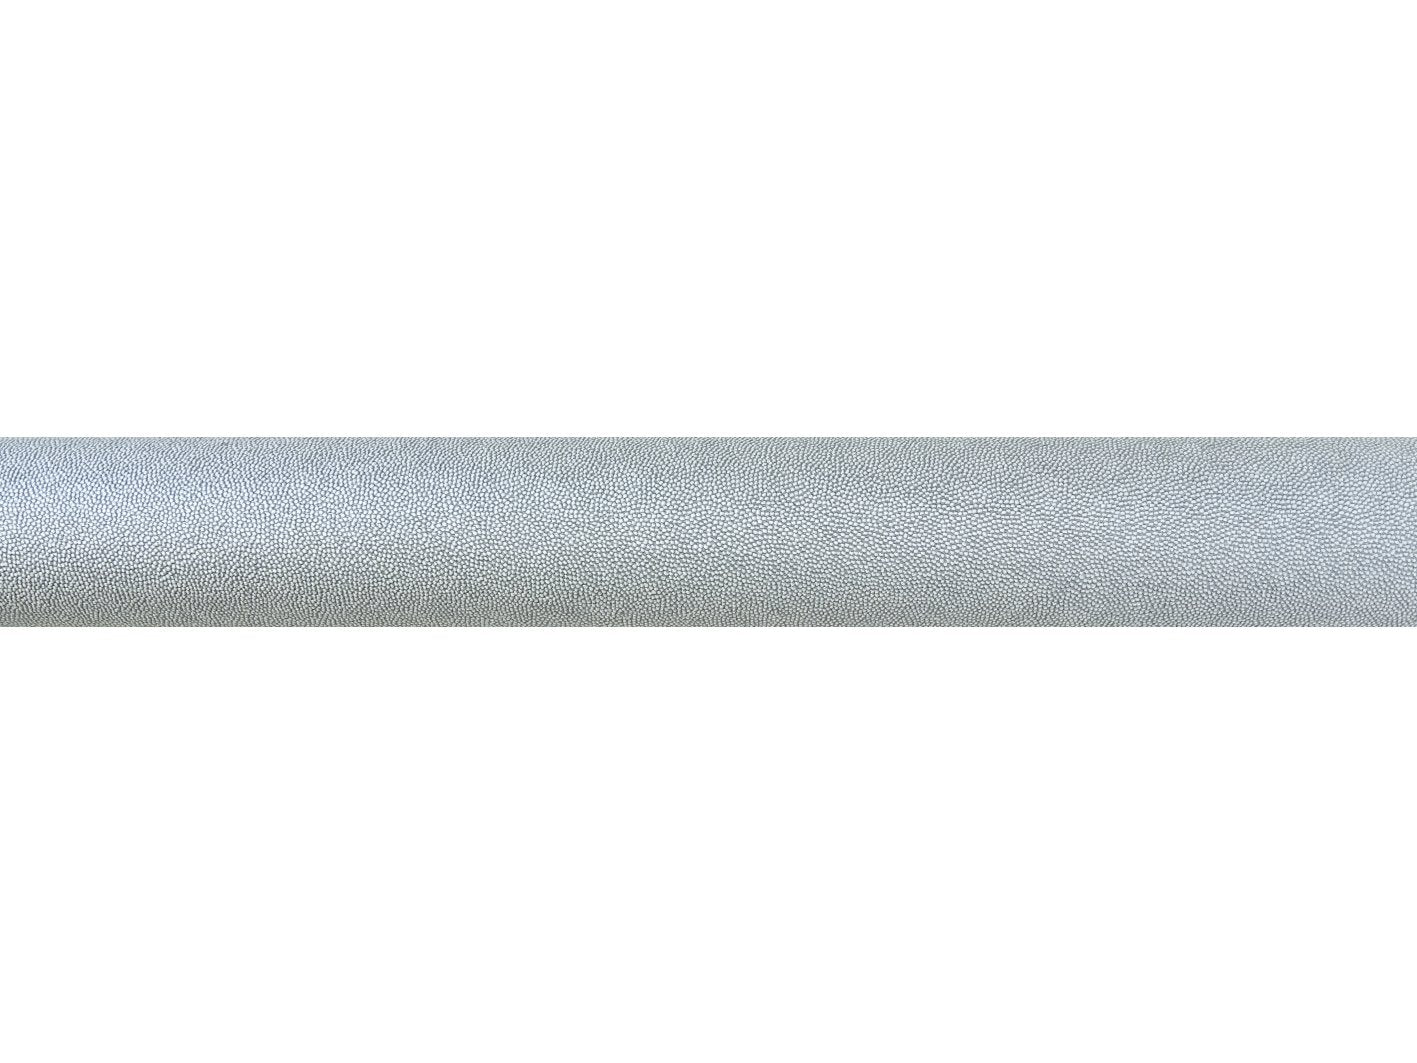 shagreen textured wrapped and tracked moonlight curtain pole silver track by Walcot House